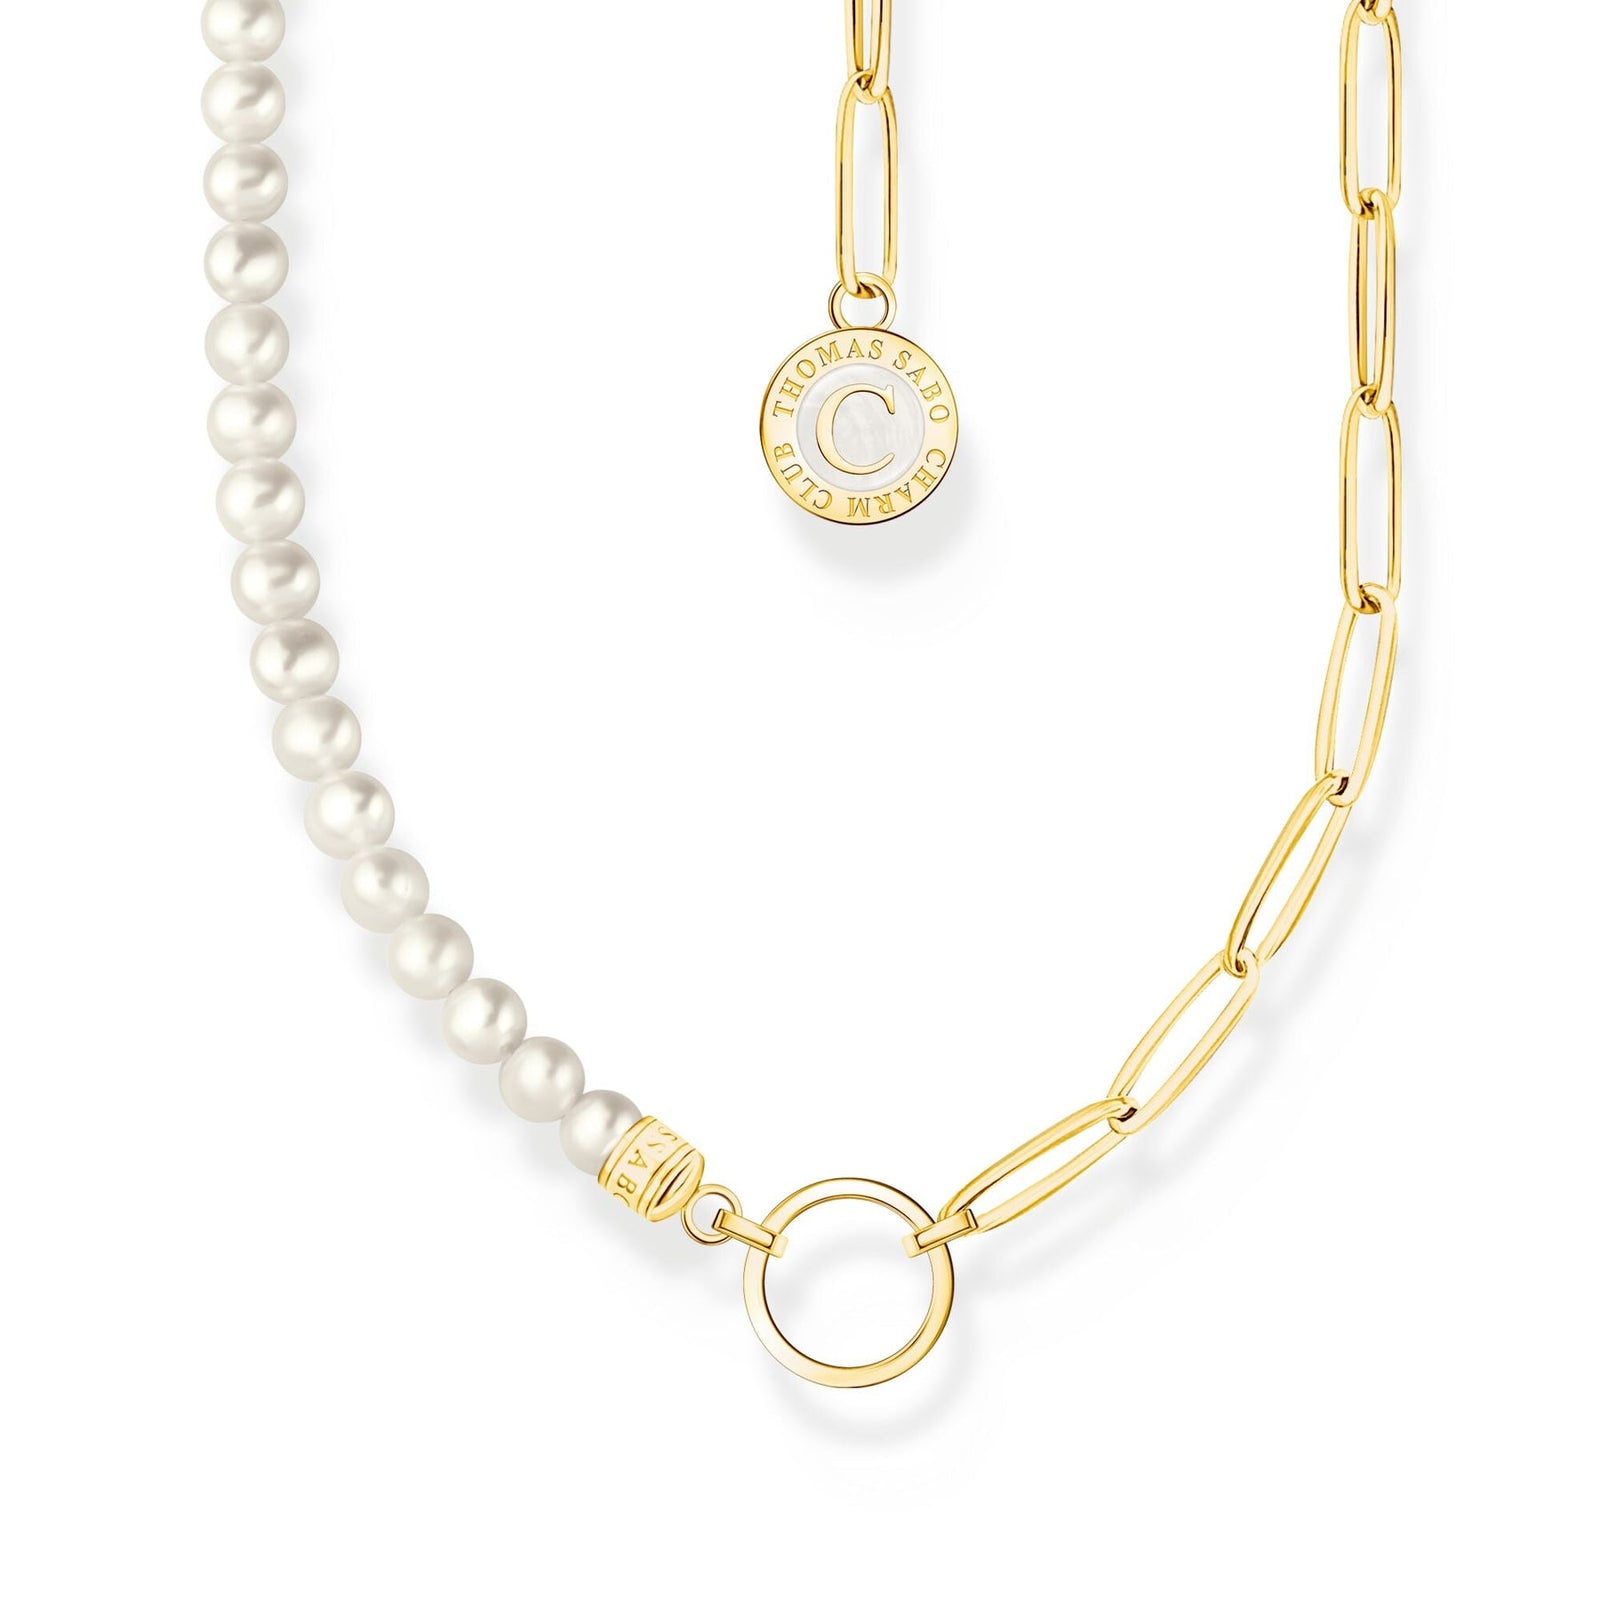 Thomas Sabo Necklace With Charmista Disc Gold Plated 45cm